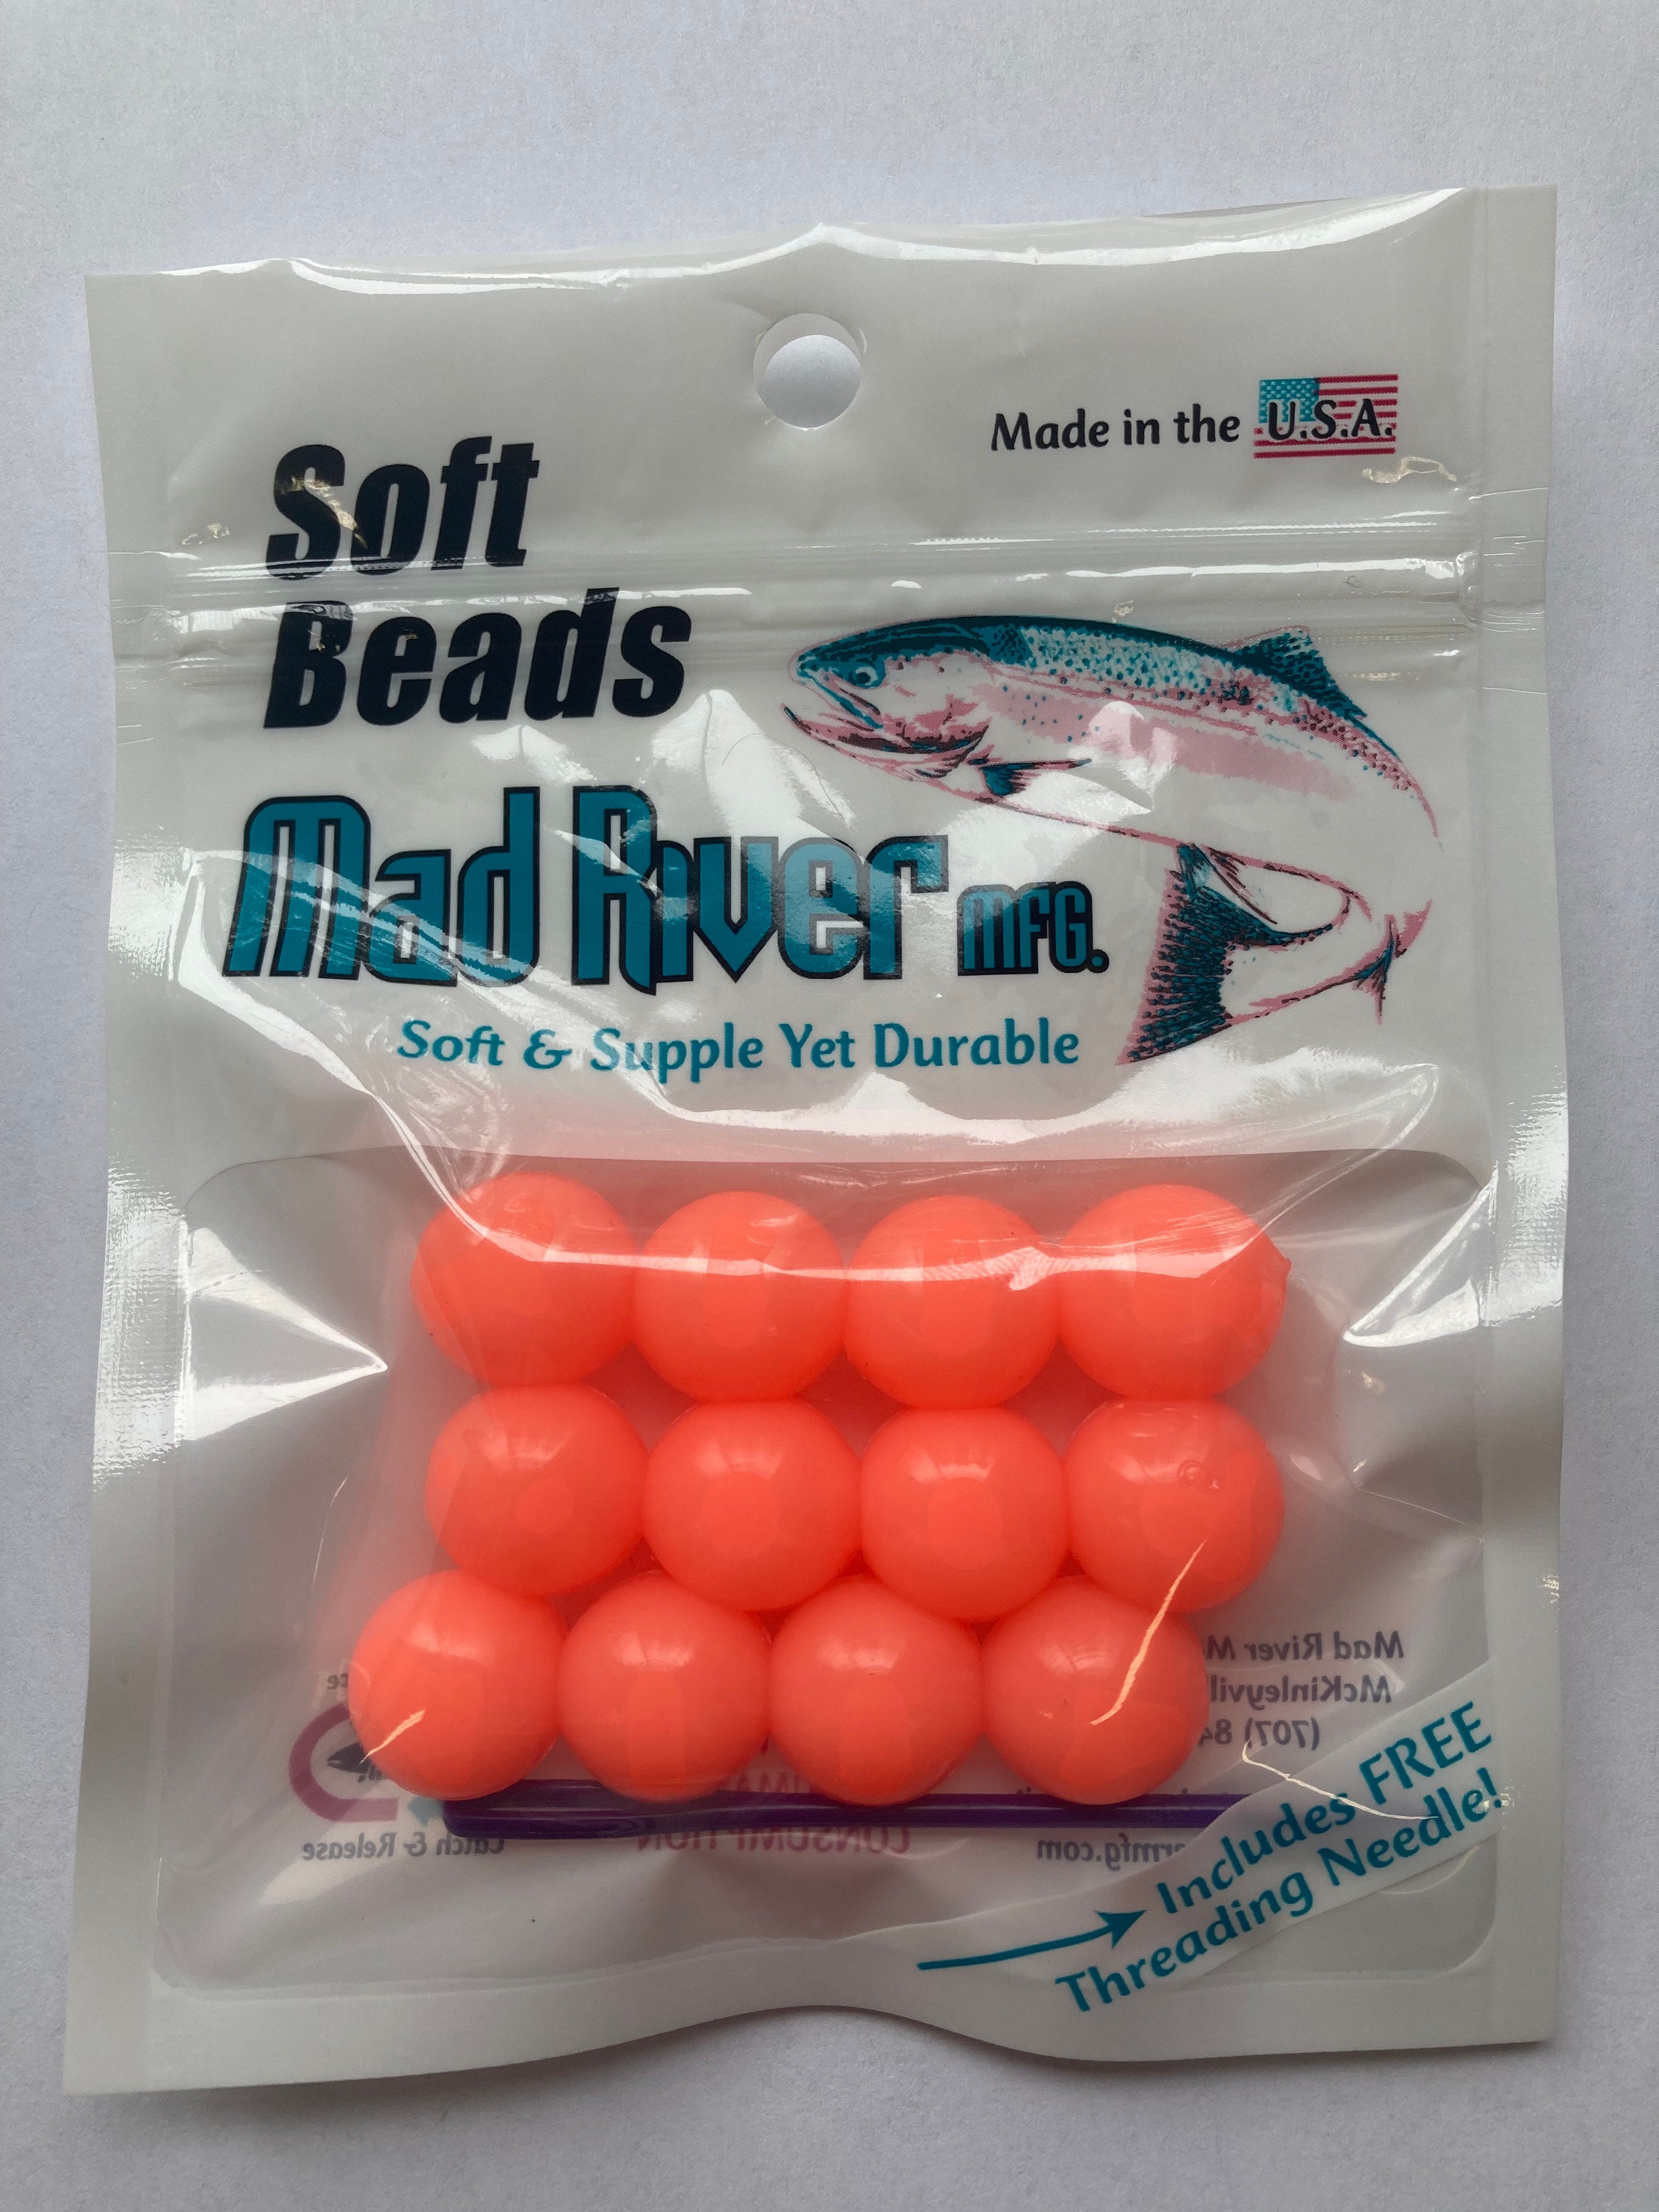 Mad River Soft Beads